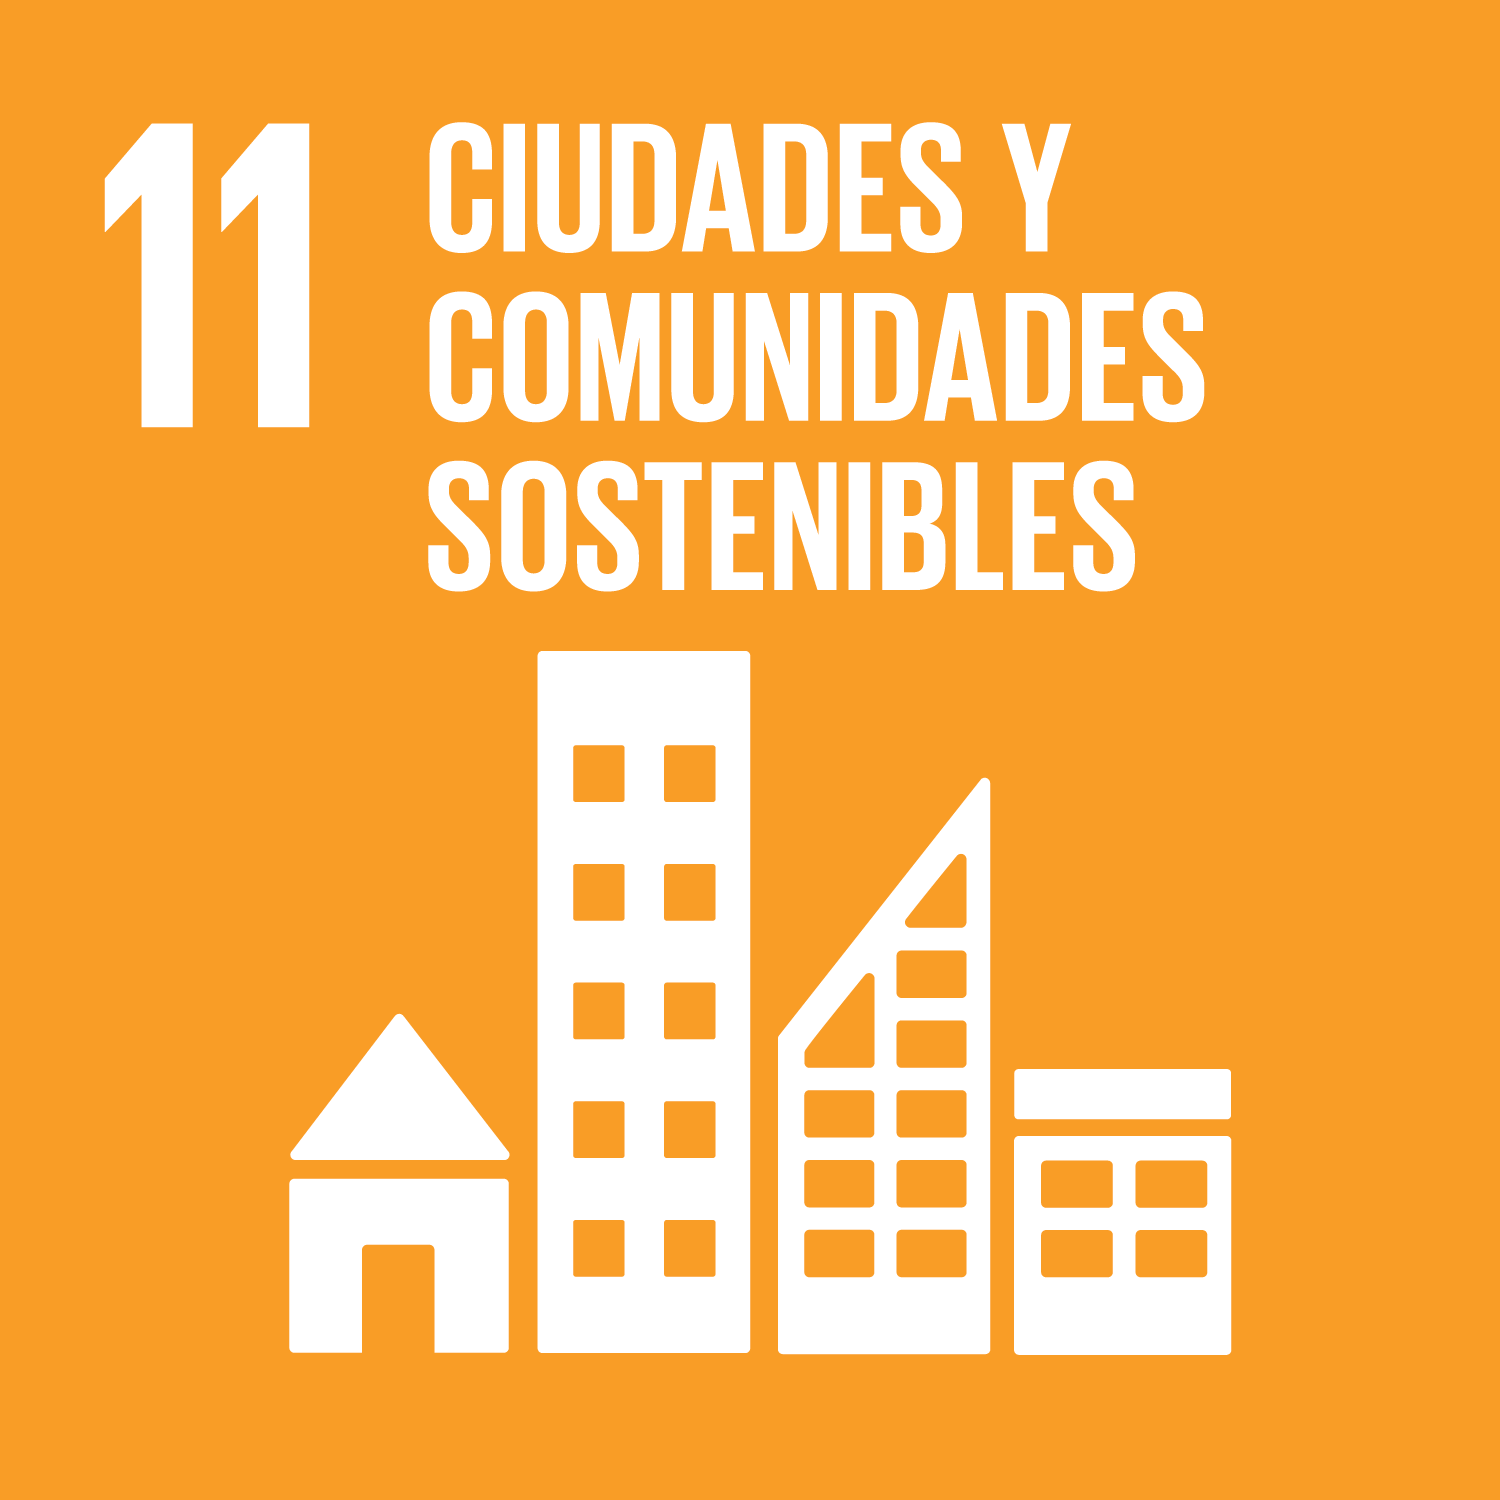 SDG Goal 11: Sustainable Cities and Communities